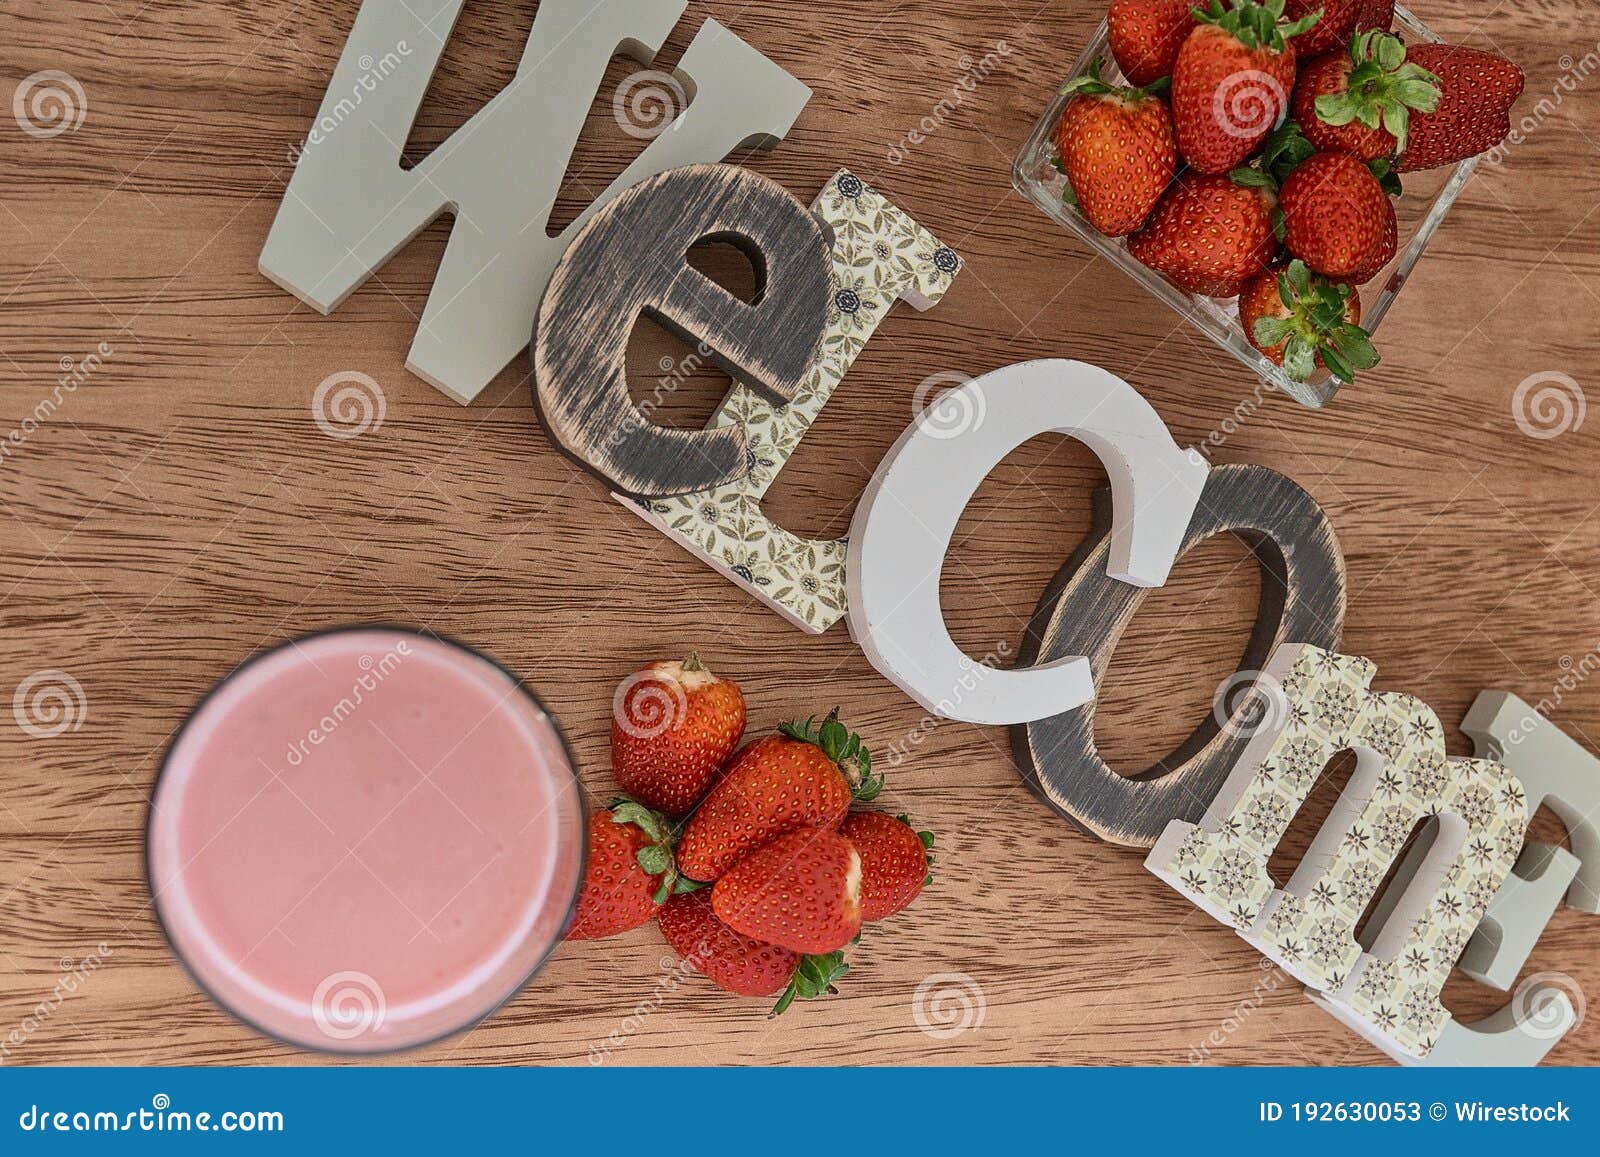 welcome home healthy strawberry juice with milk